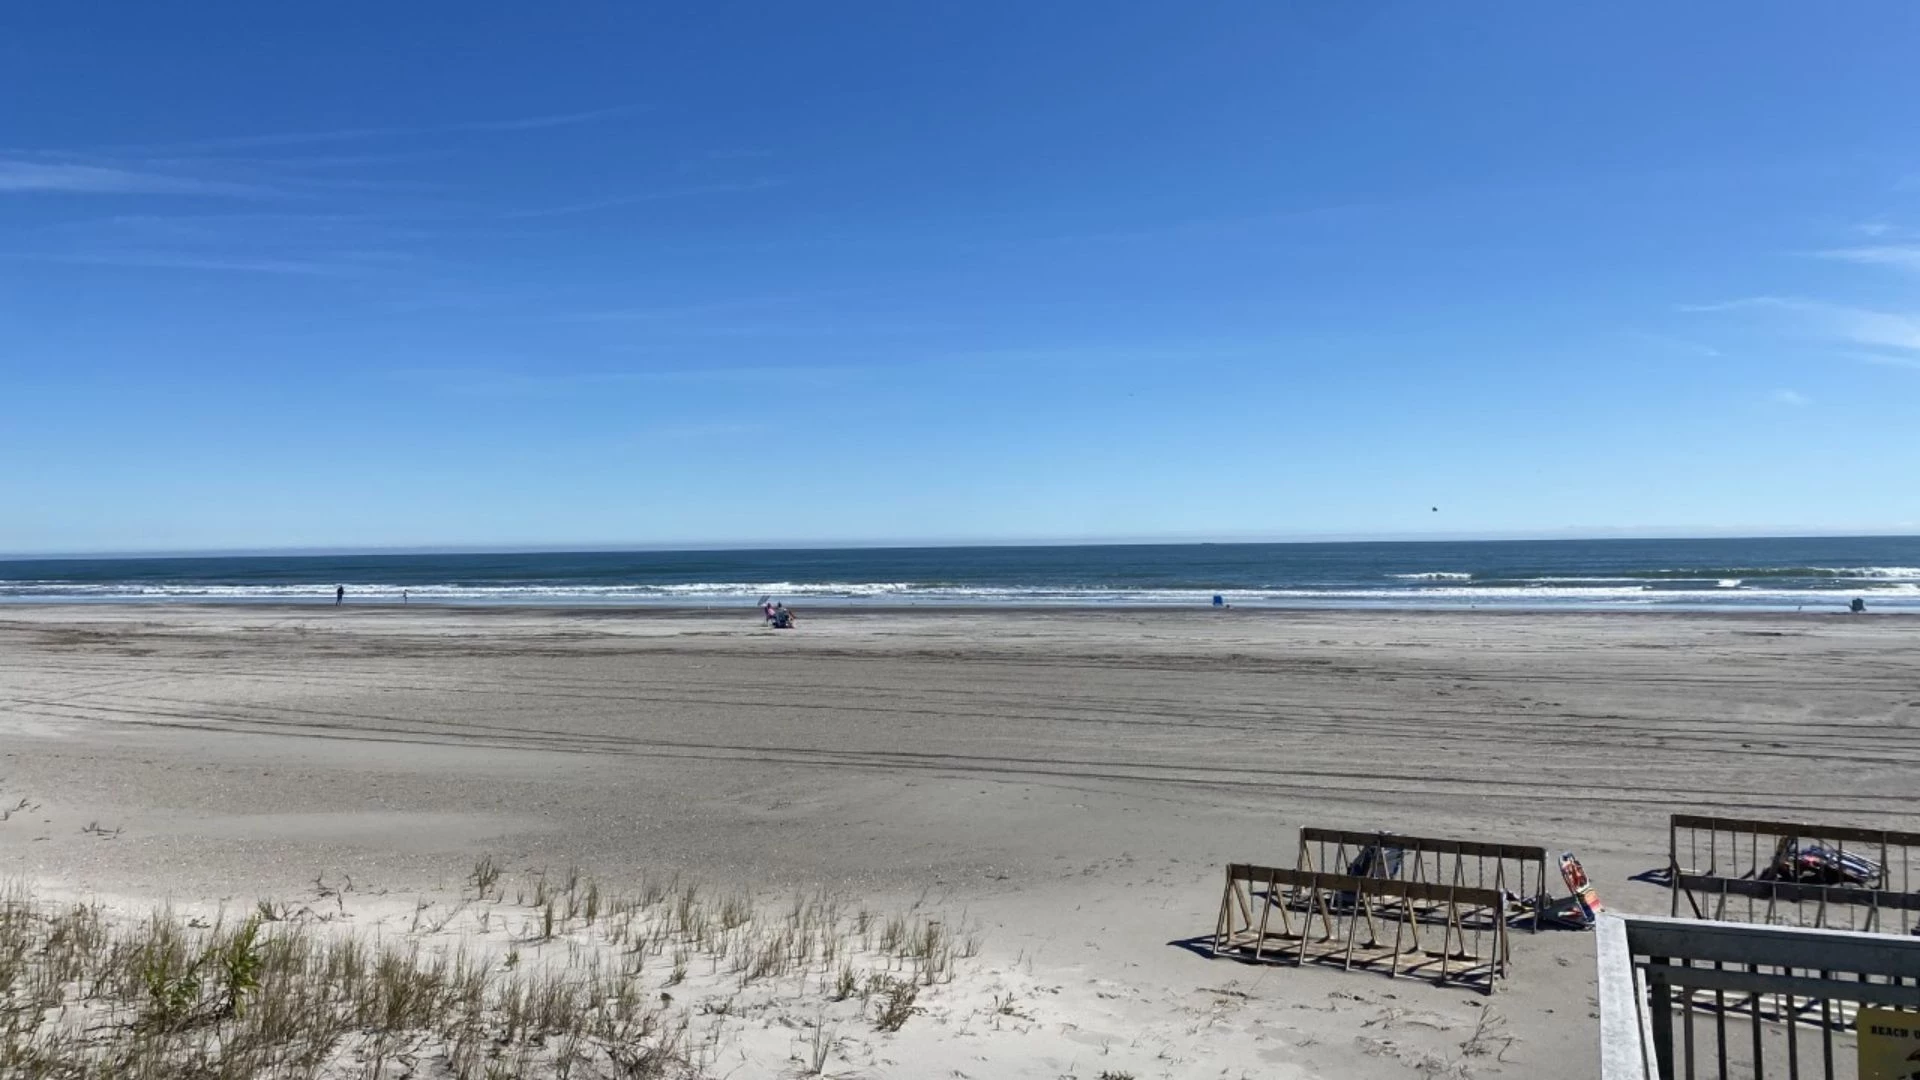 10 ways to enjoy the NJ beaches in the winter